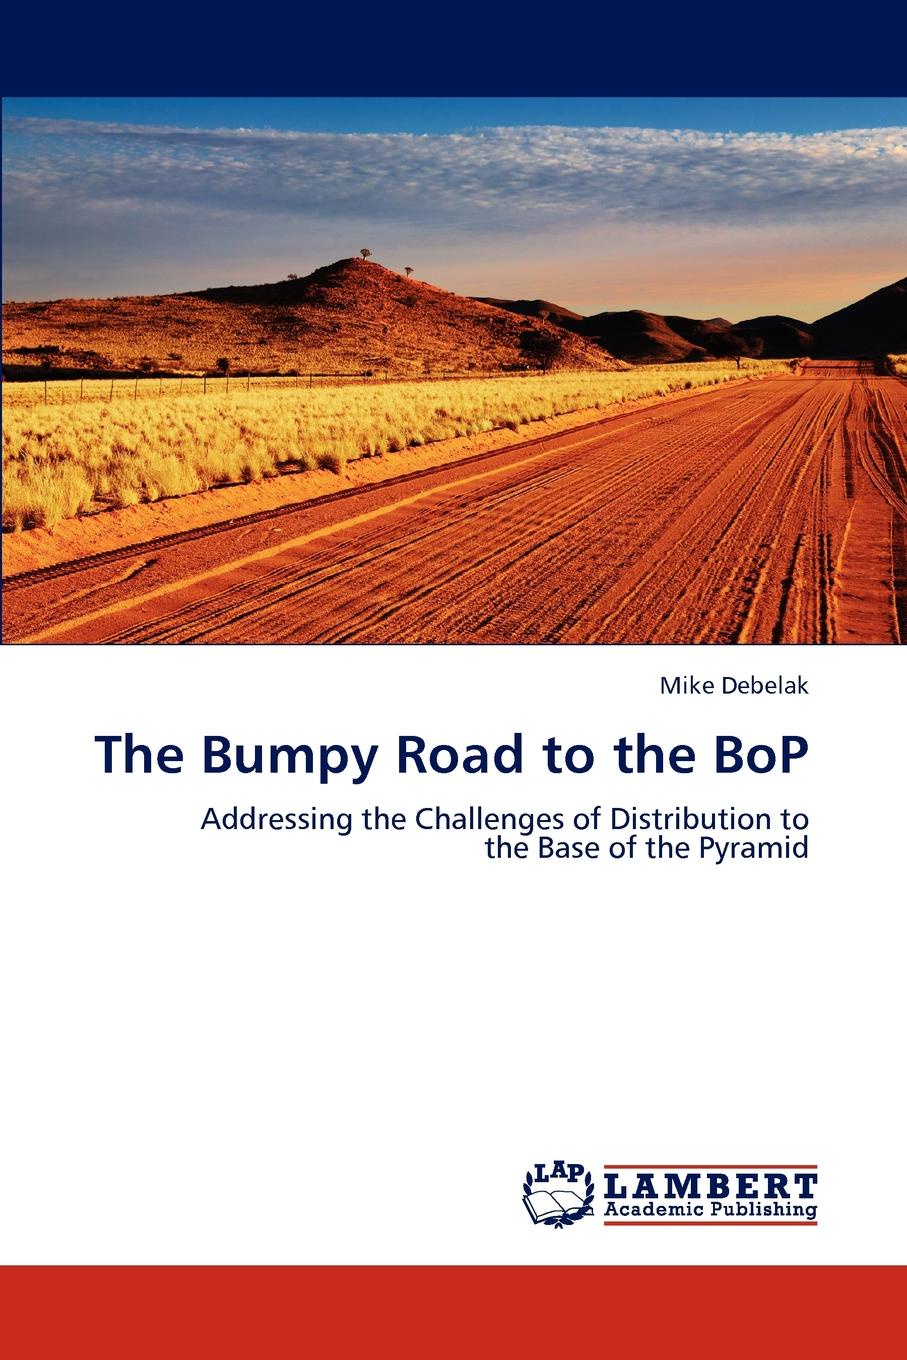 The Bumpy Road to the Bop